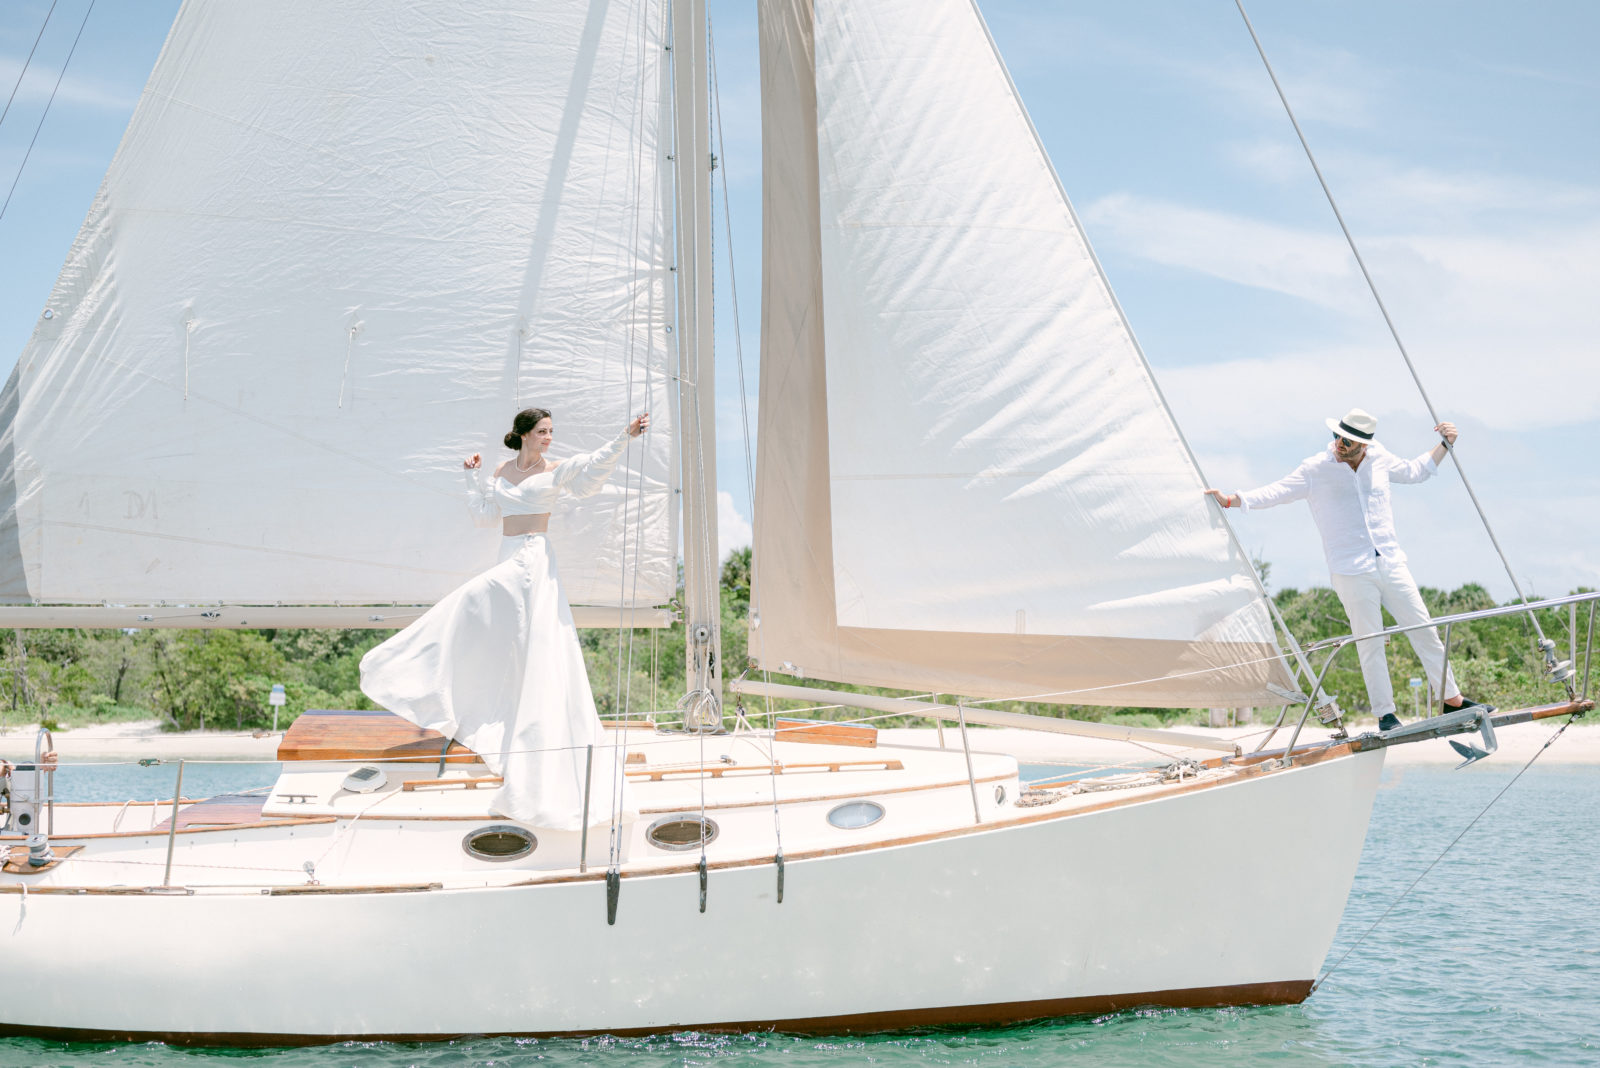 Bridal styled shoot on a sailboat in West Palm Beach, Florida